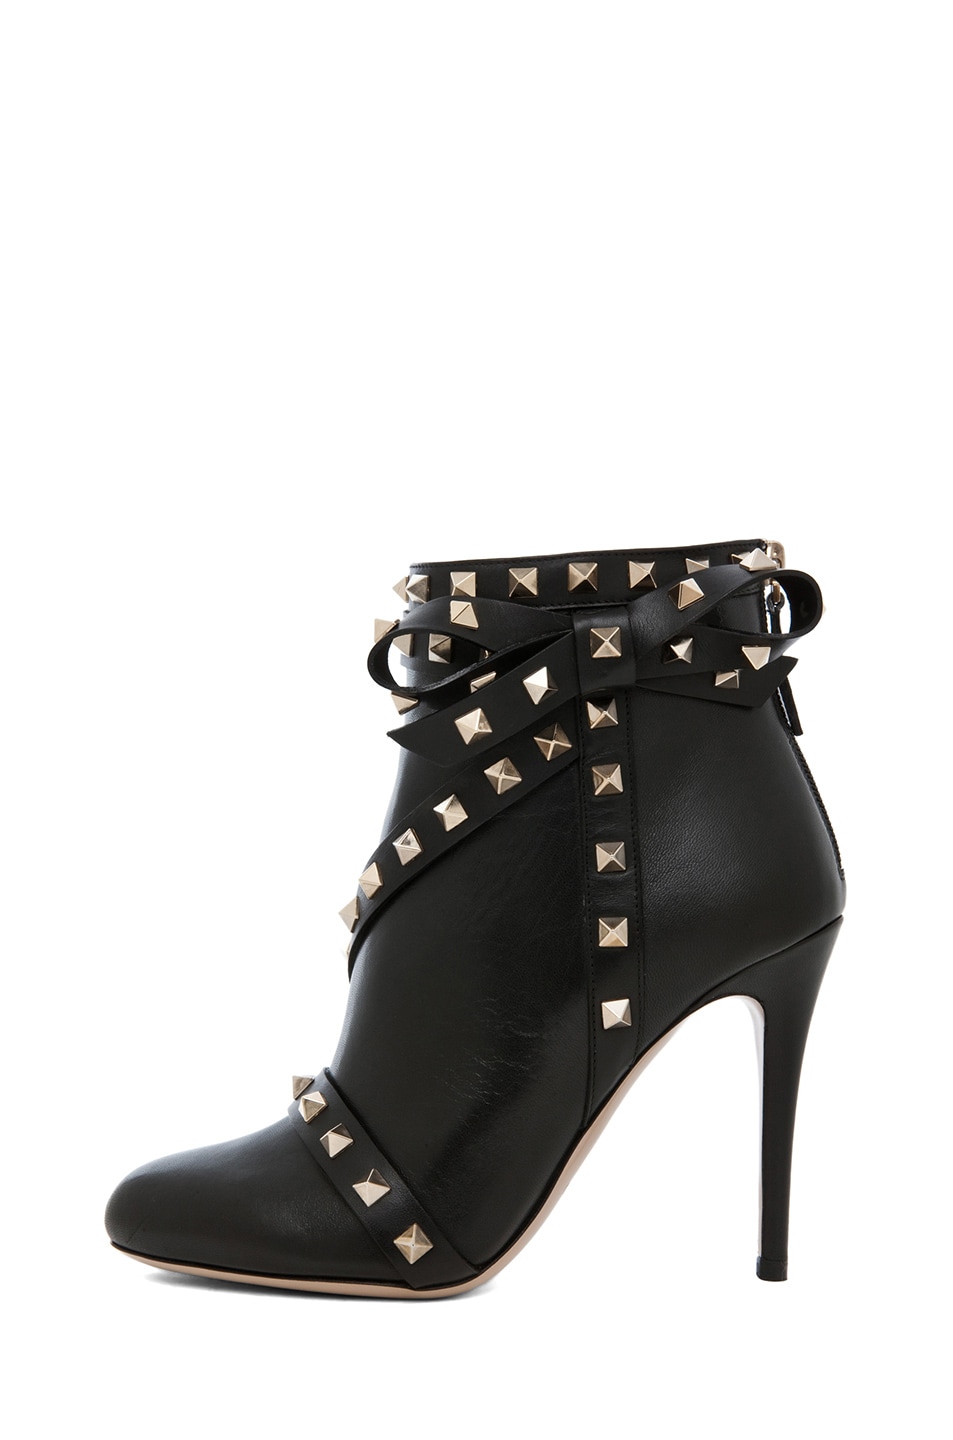 Valentino Rockstud Bootie with Bow in Black | FWRD